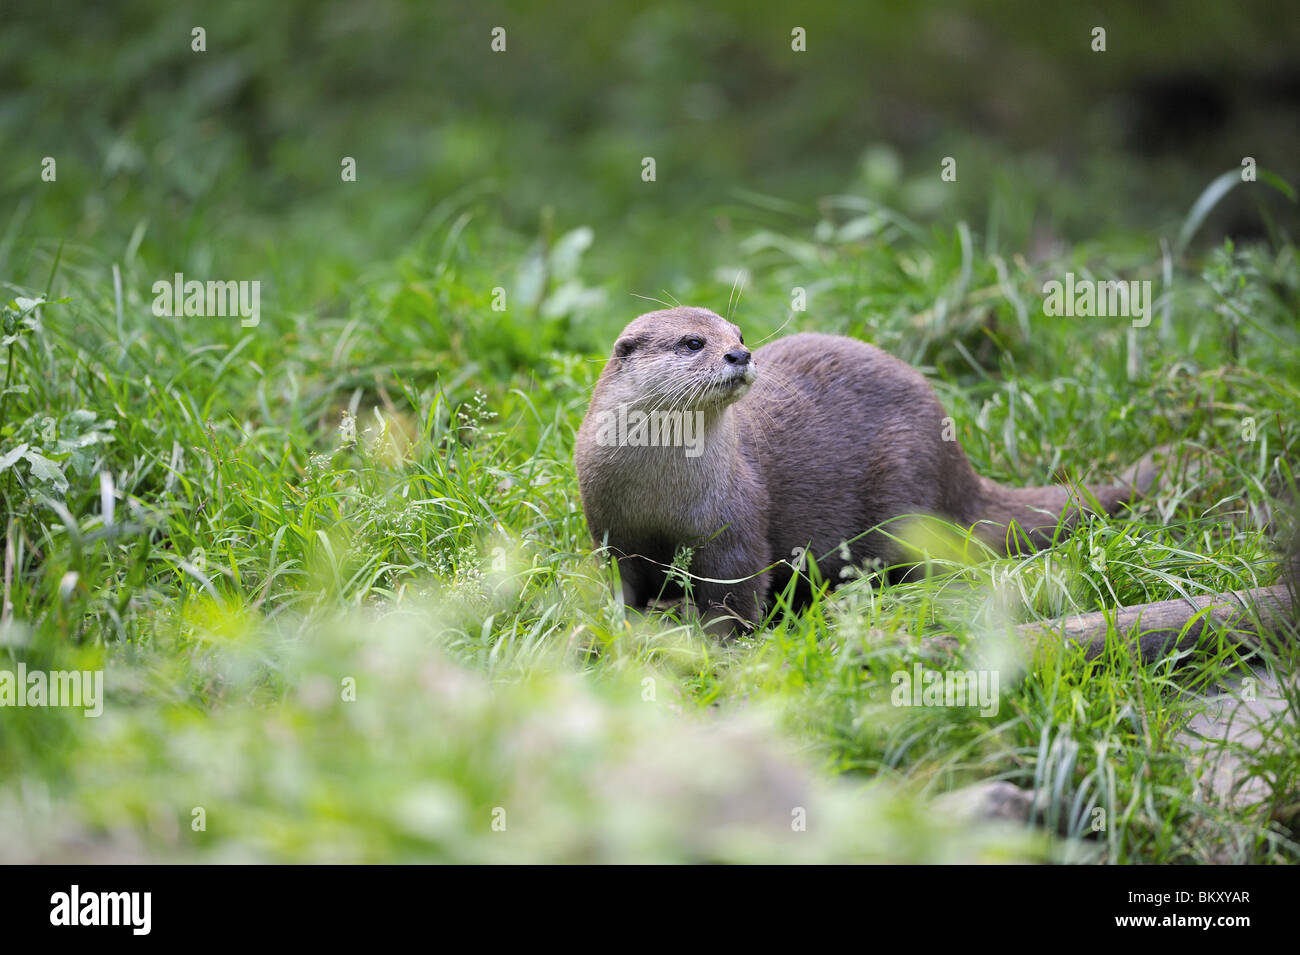 Oriental small-clawed otter standing in grass Stock Photo